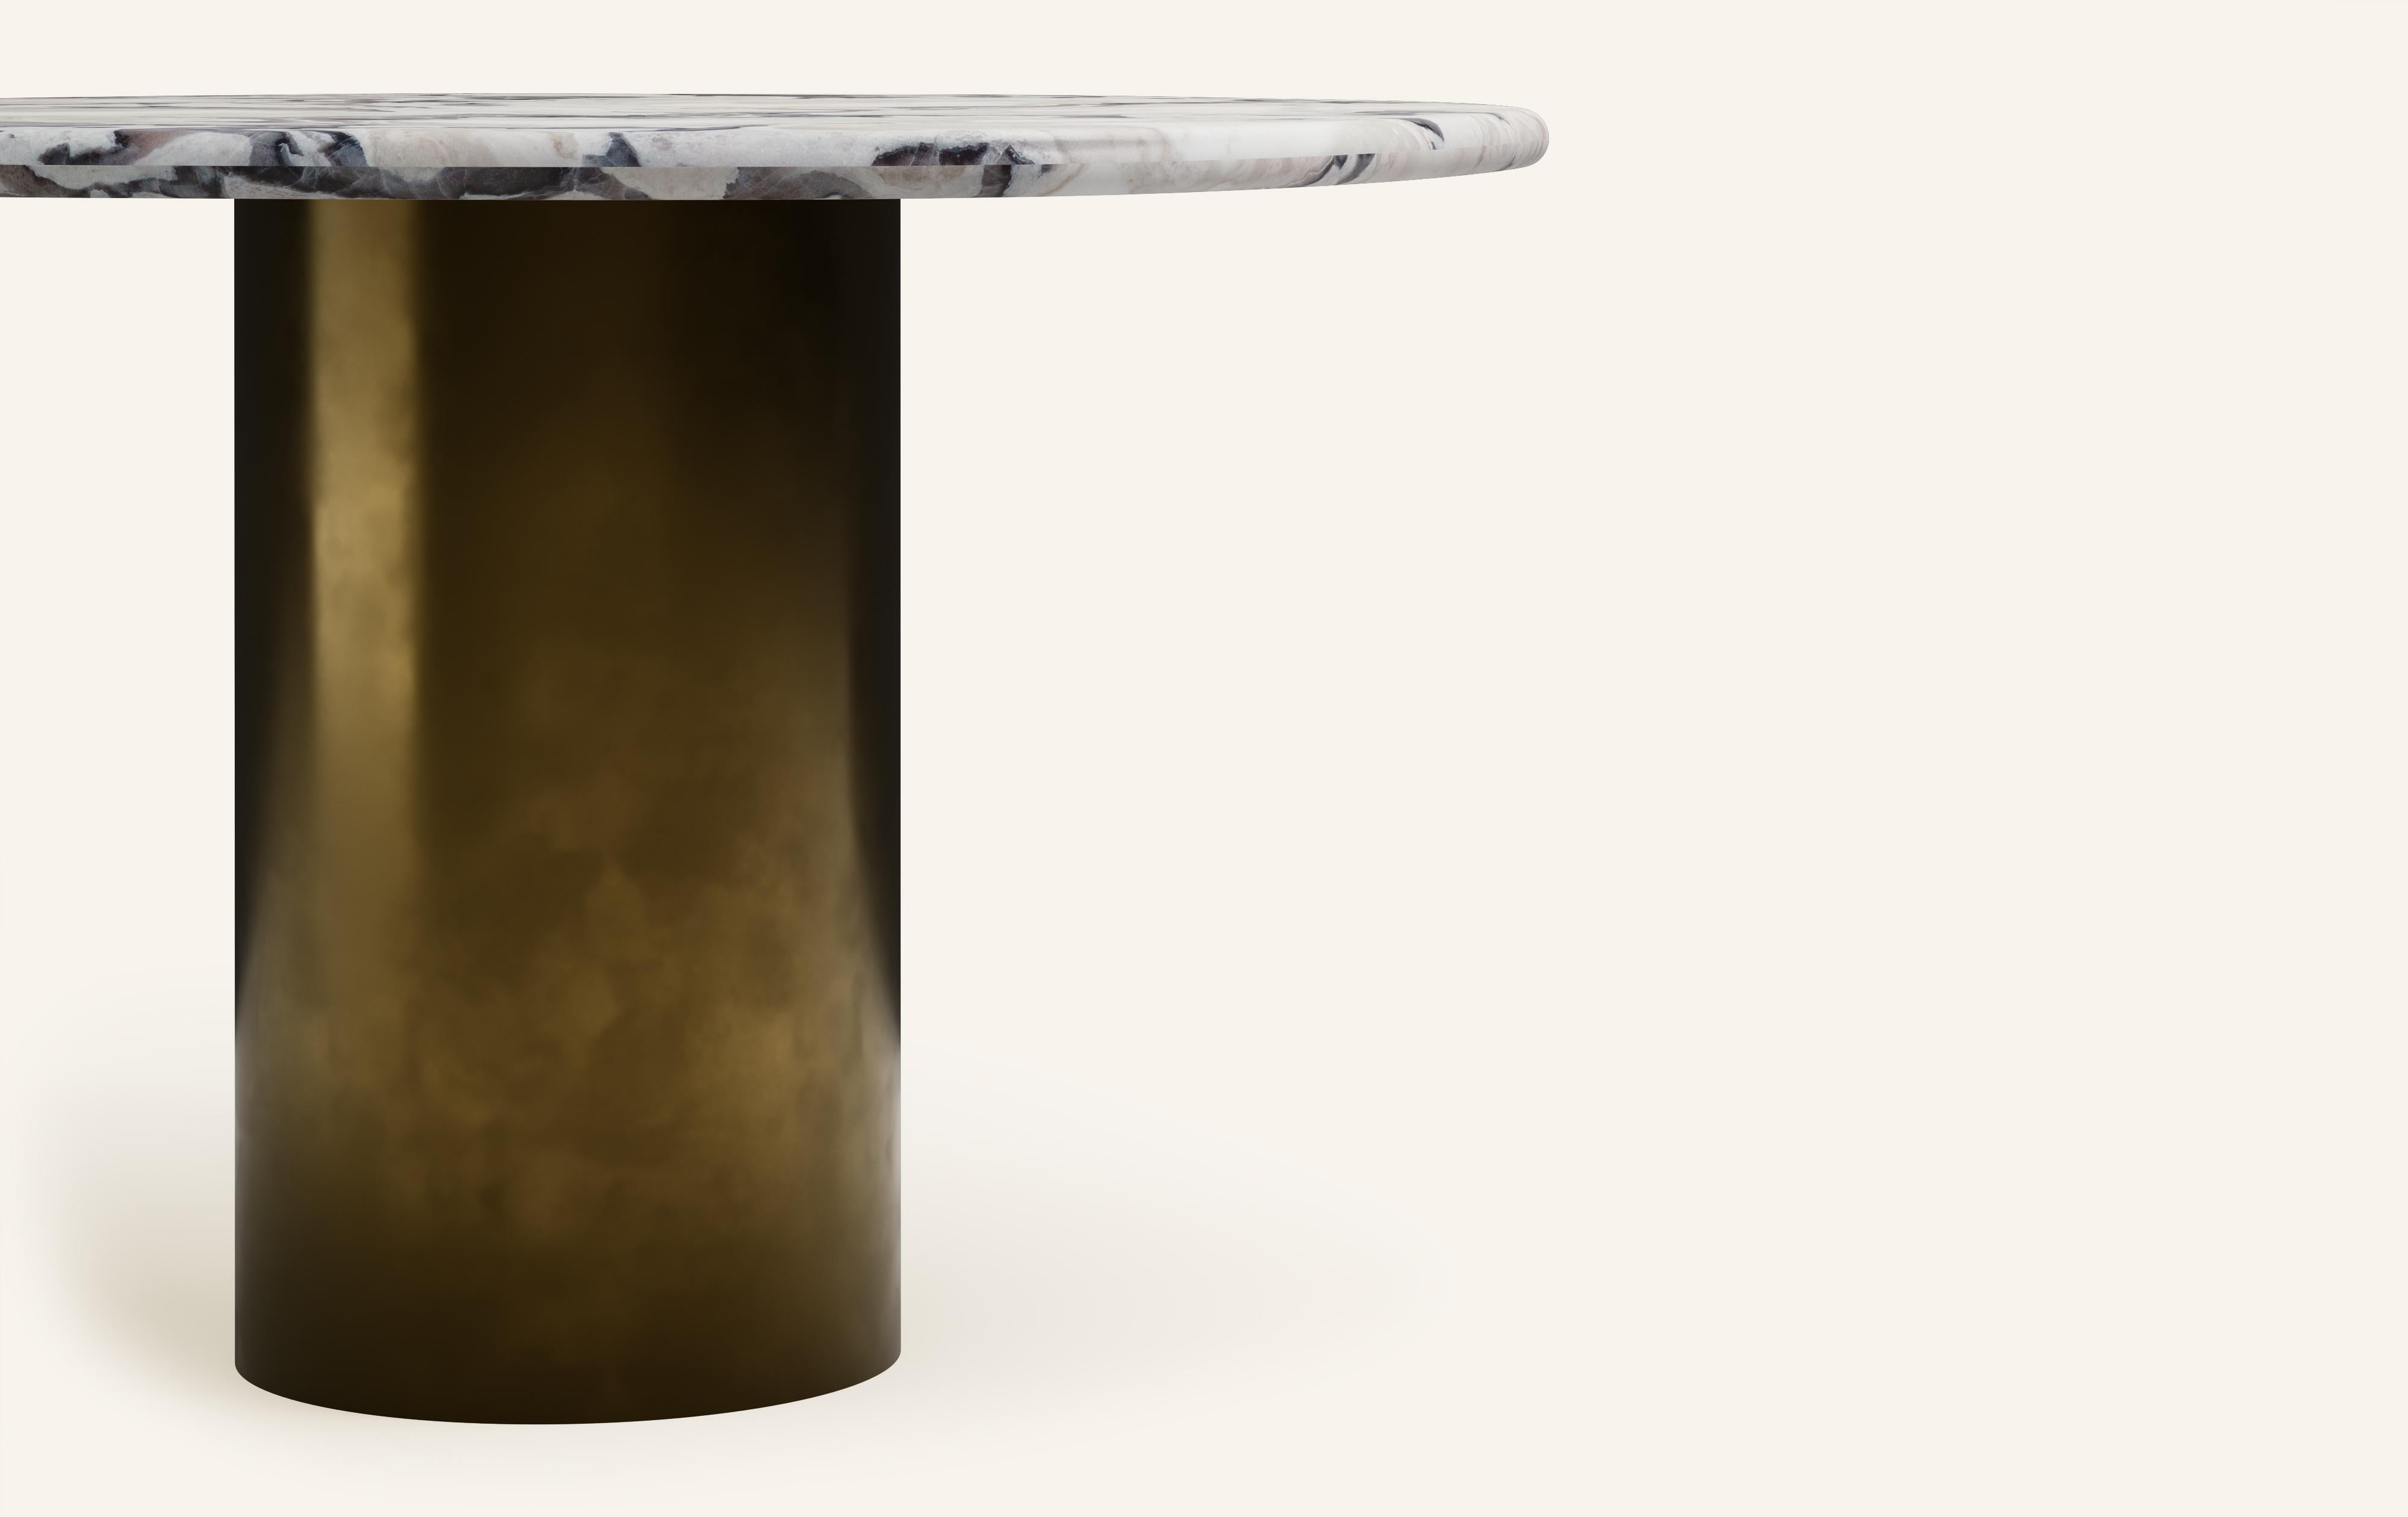 Organic Modern FORM(LA) Lago Round Dining Table 54”L x 54”W x 30”H Oyster Marble & Bronze For Sale